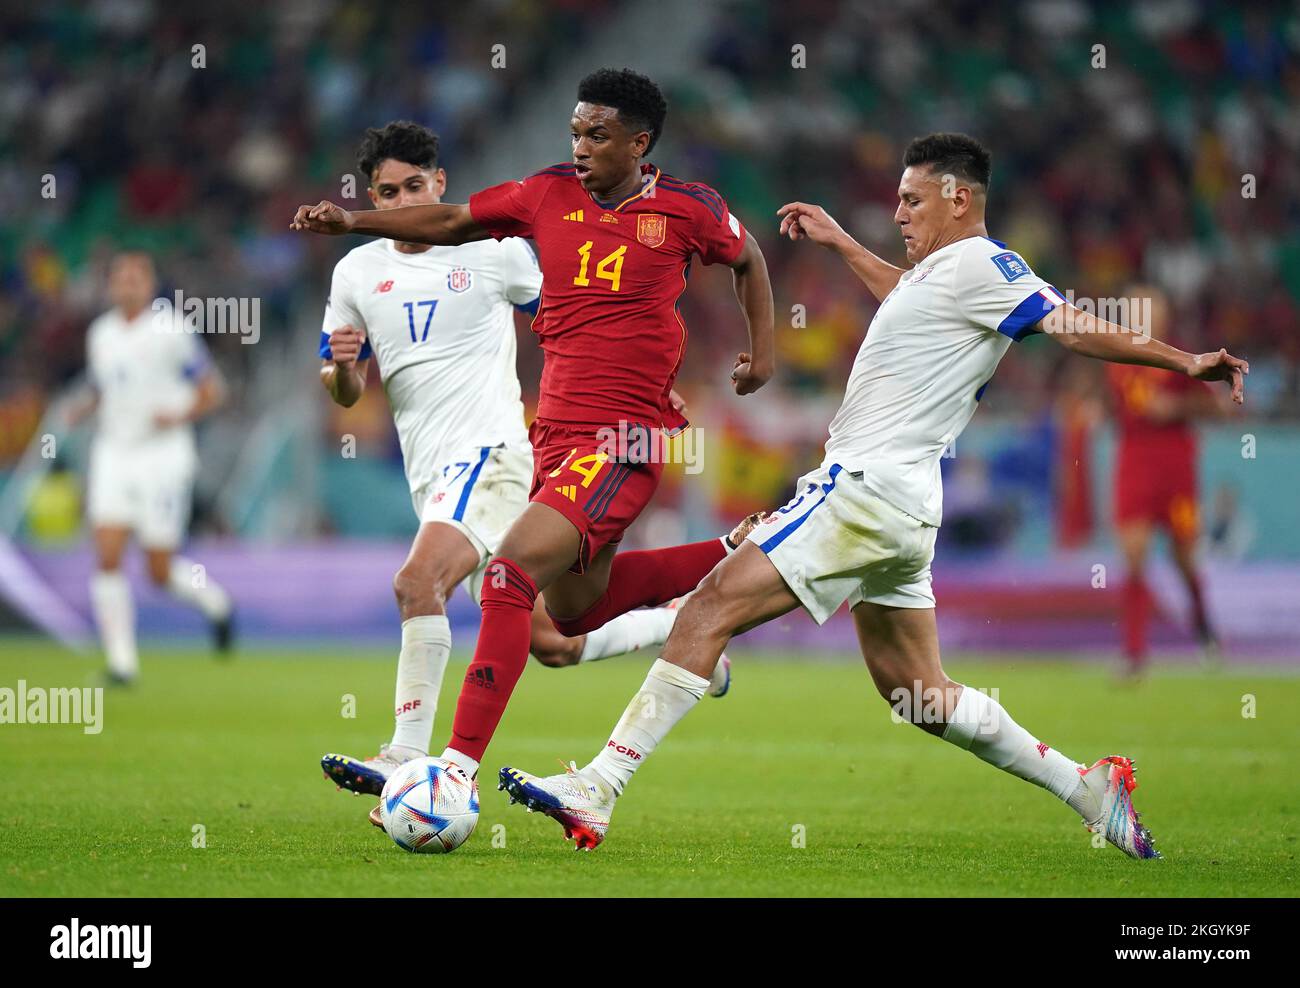 Costa Rica's Yeltsin Tejeda, Spain's Alejandro Balde and Costa Rica's Oscar Duarte (left-right) battle for the ball during the FIFA World Cup Group E match at the Al Thumama Stadium, Doha. Picture date: Wednesday November 23, 2022. Stock Photo